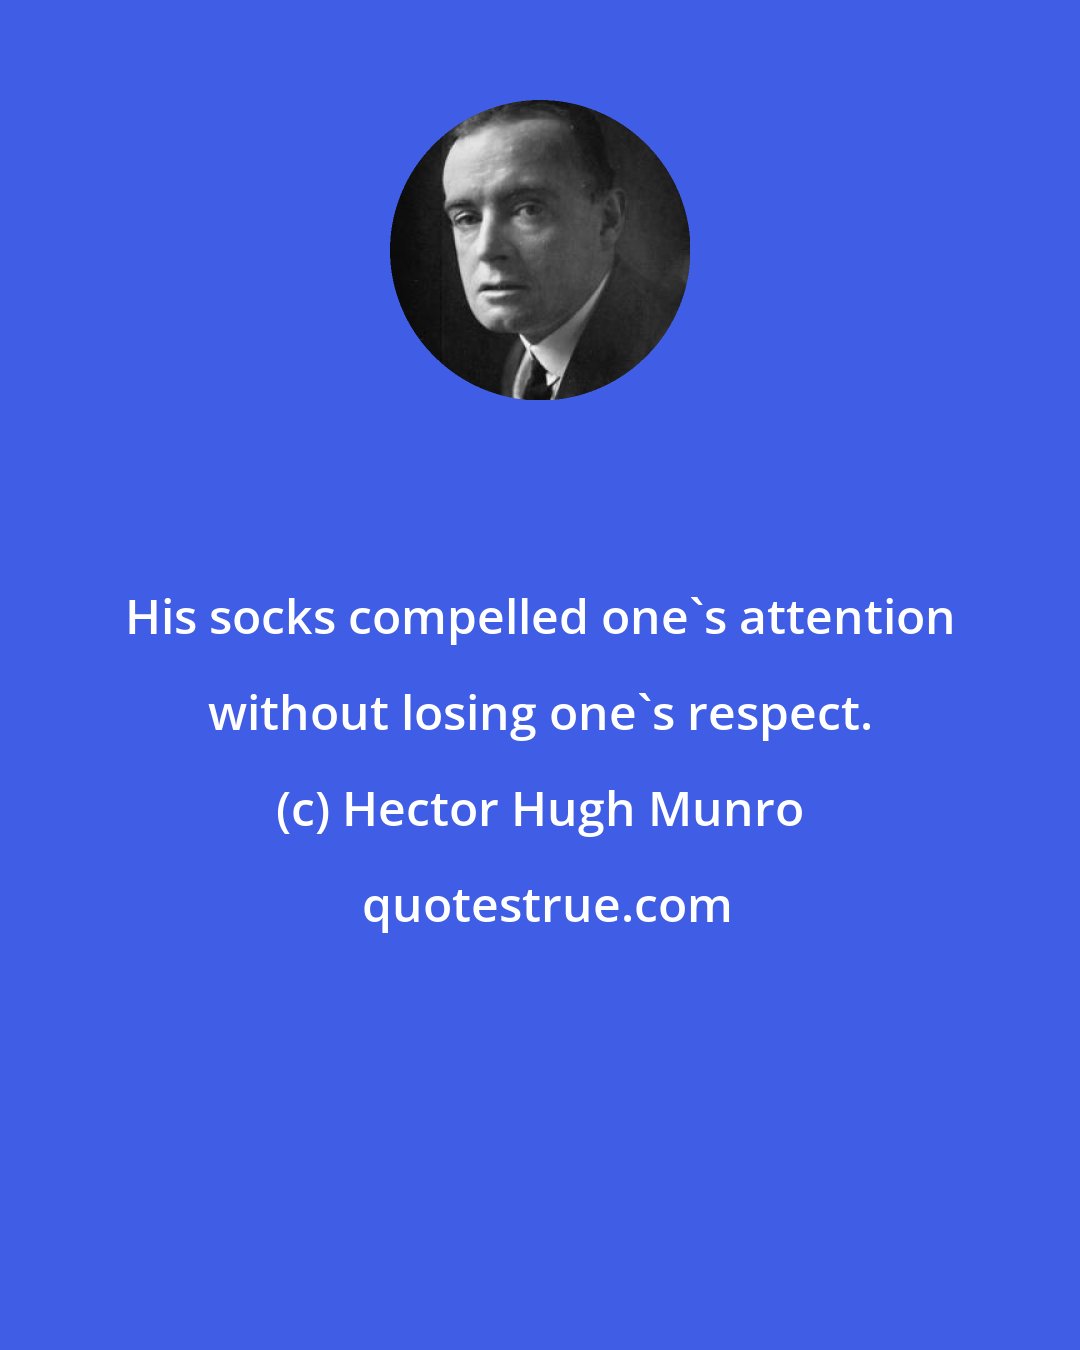 Hector Hugh Munro: His socks compelled one's attention without losing one's respect.